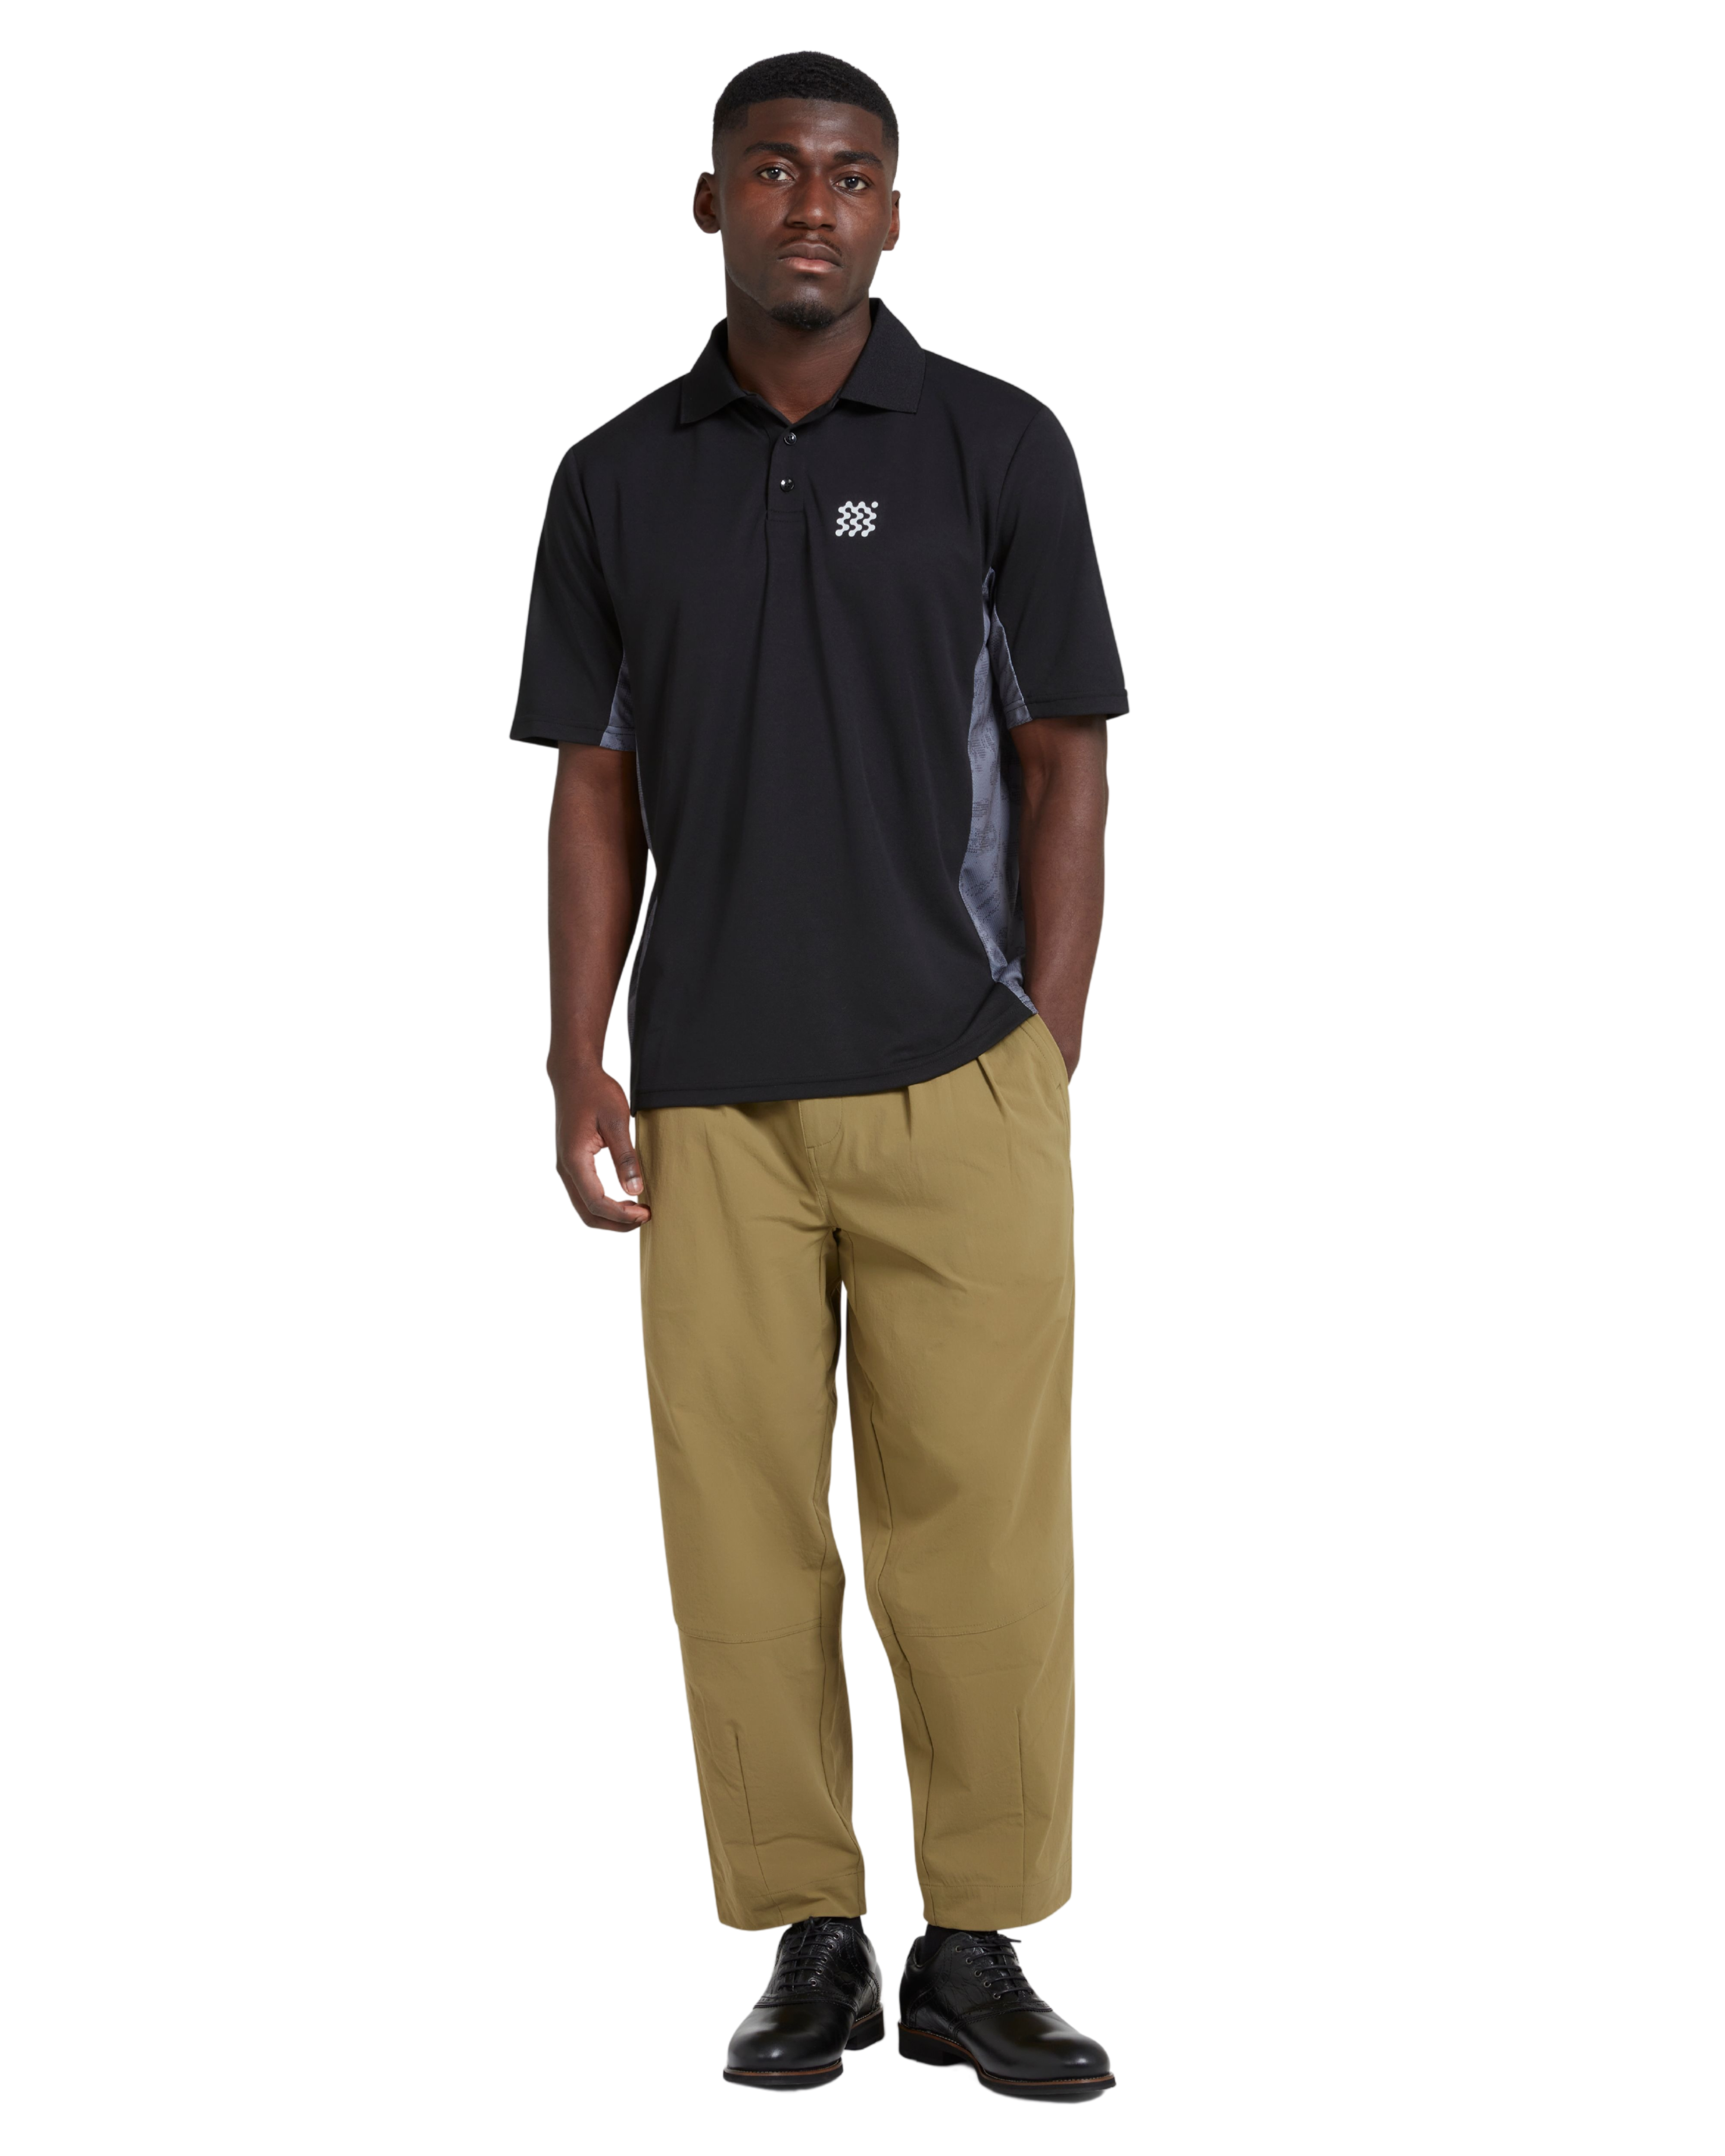 MANORS Men's The Course Polo